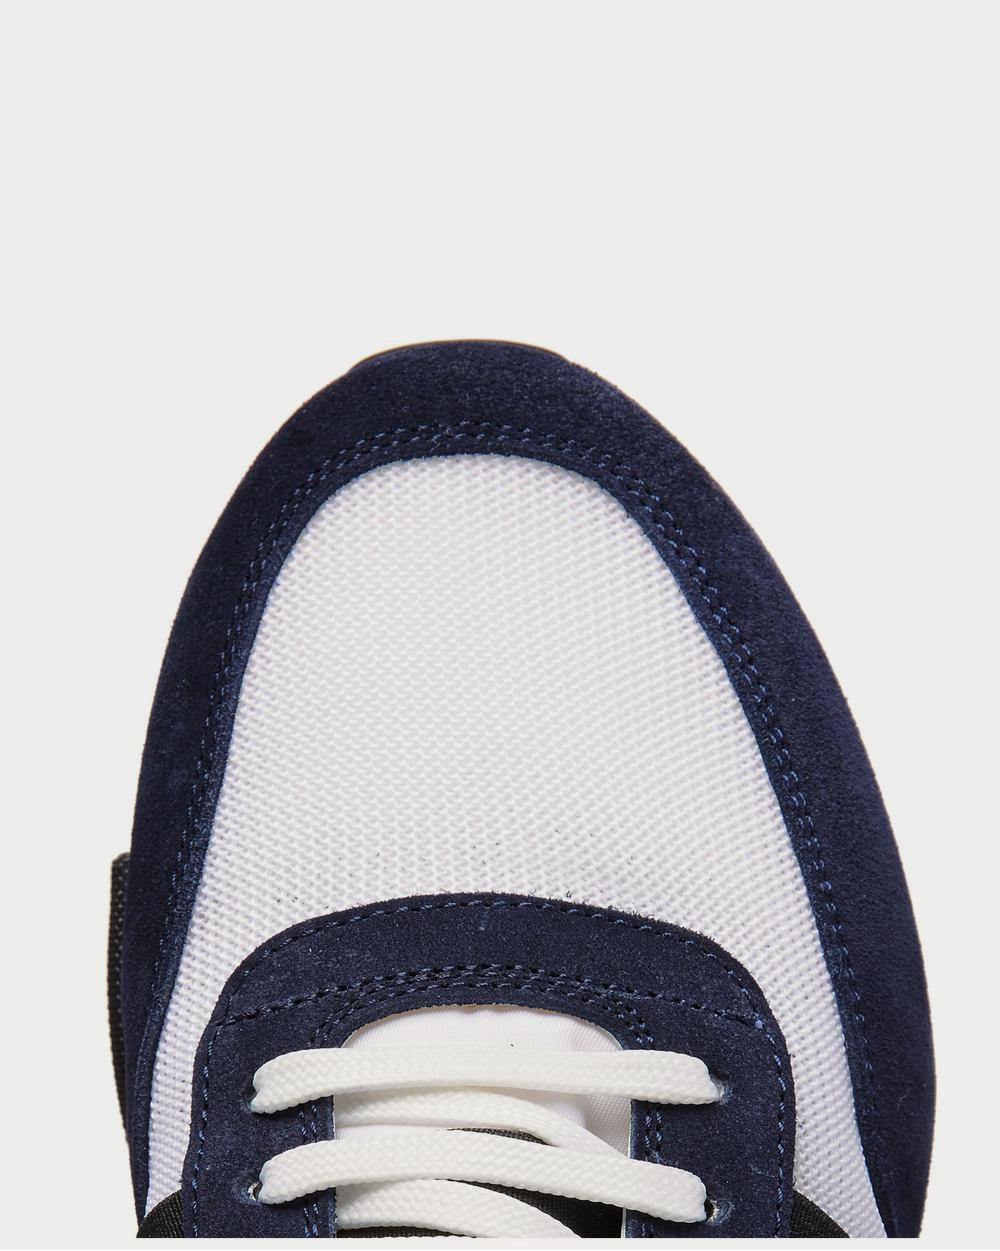 Moncler - Horace Suede and Mesh  Navy low top sneakers